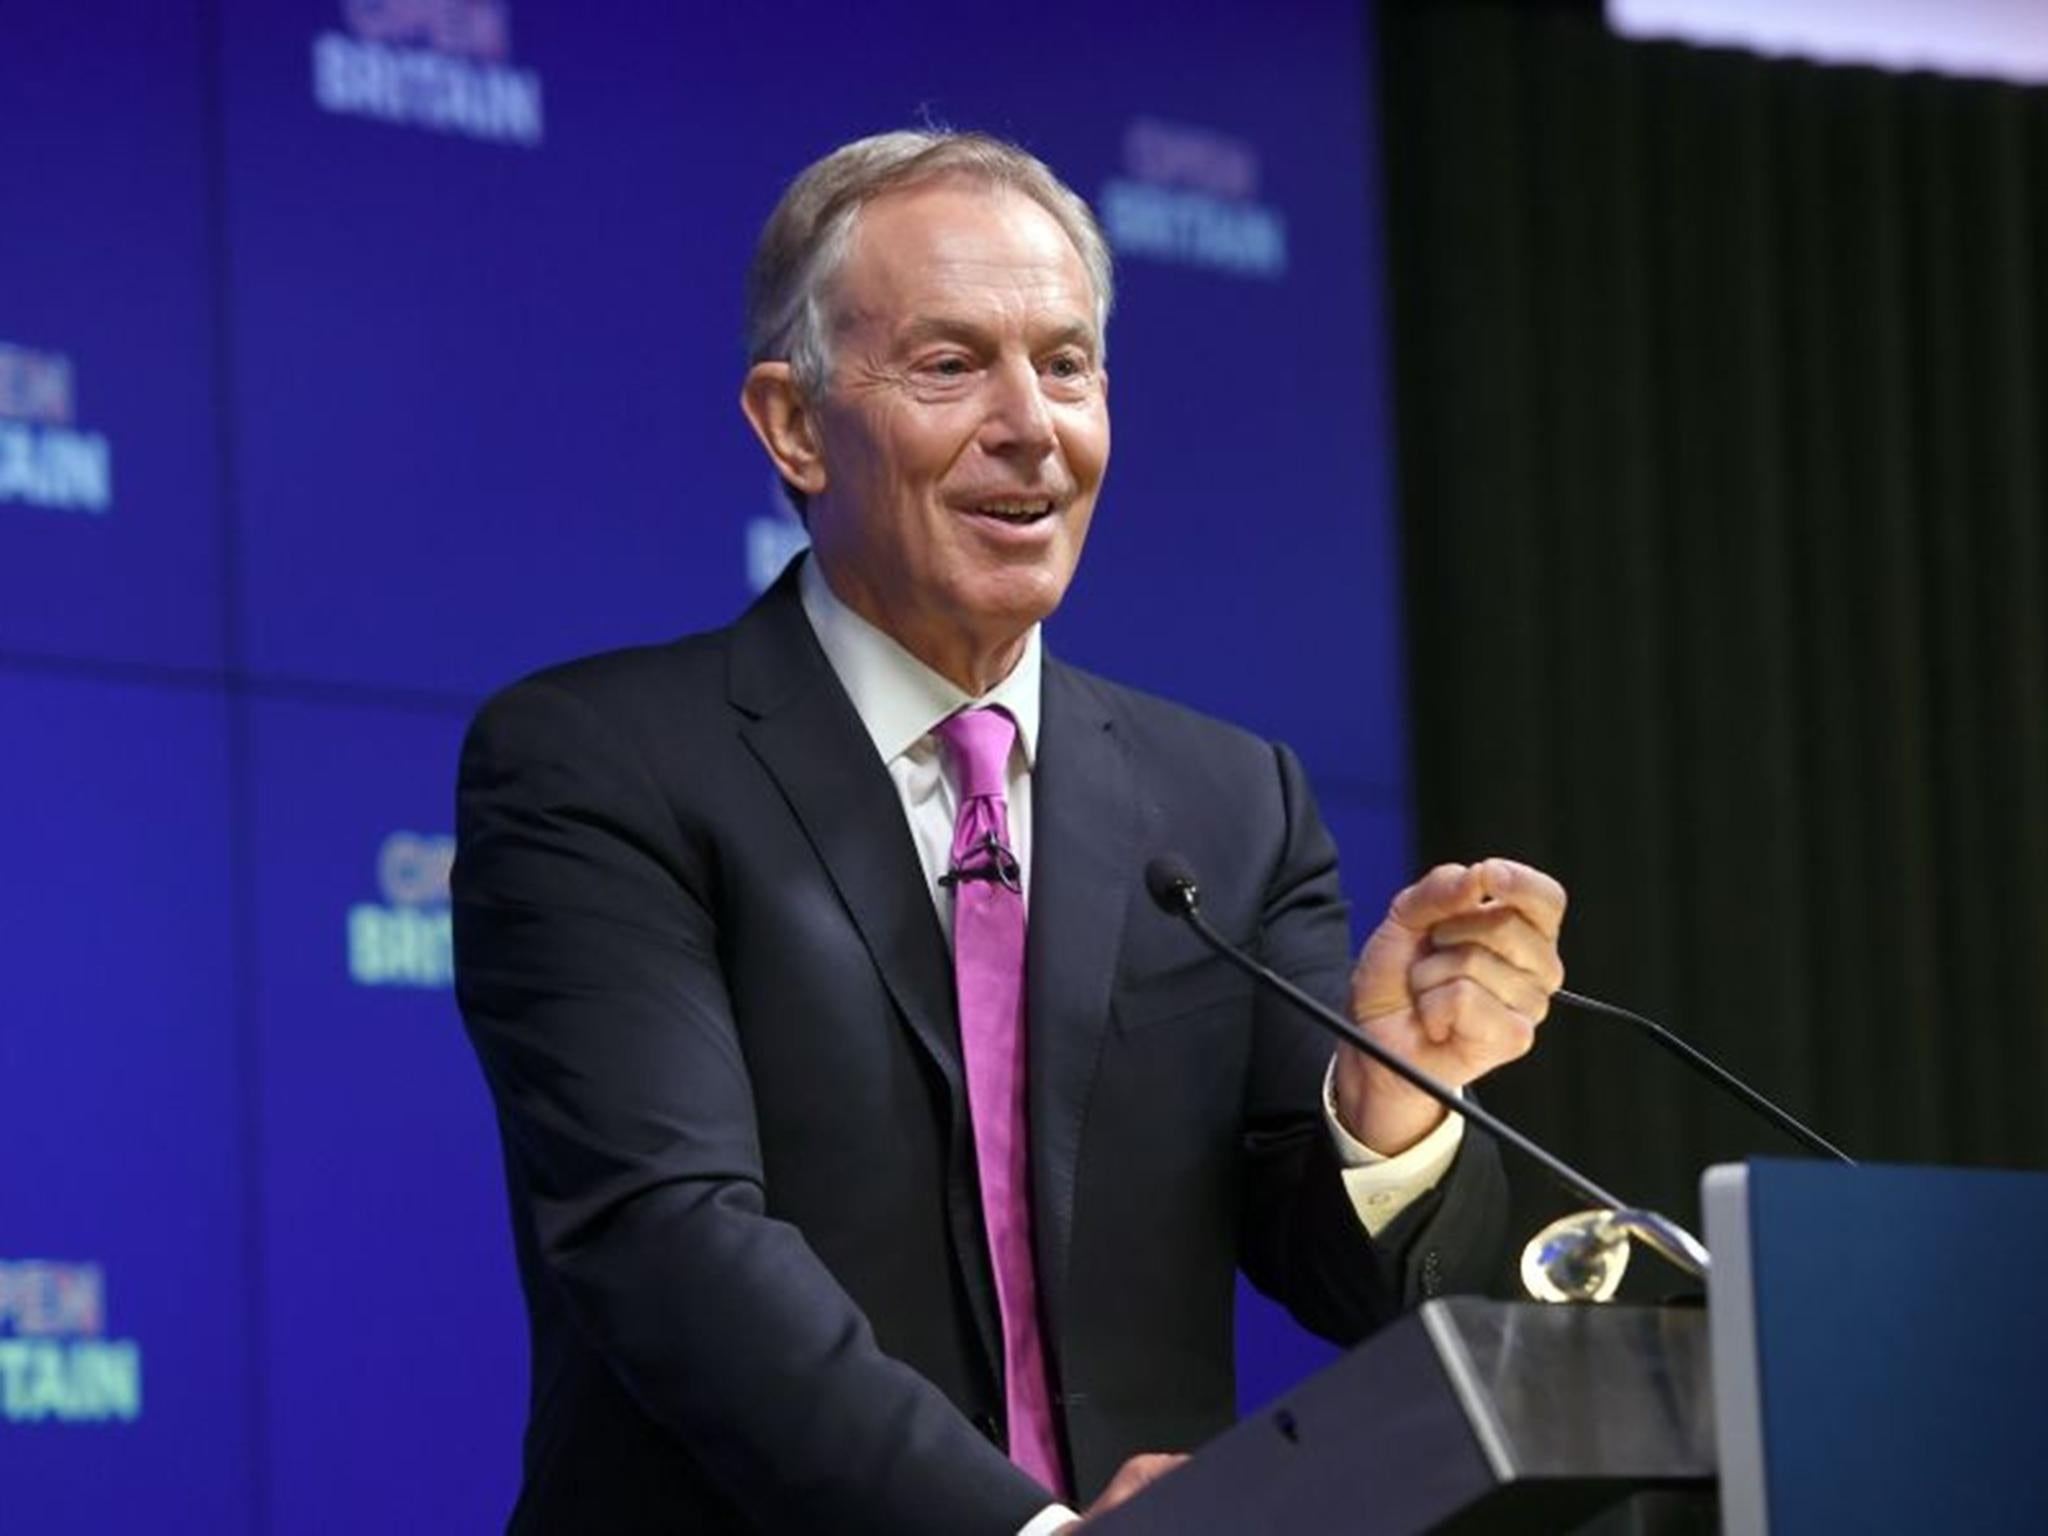 Blair will use a speech in Washington DC to call for a rebalancing of counter-extremism efforts